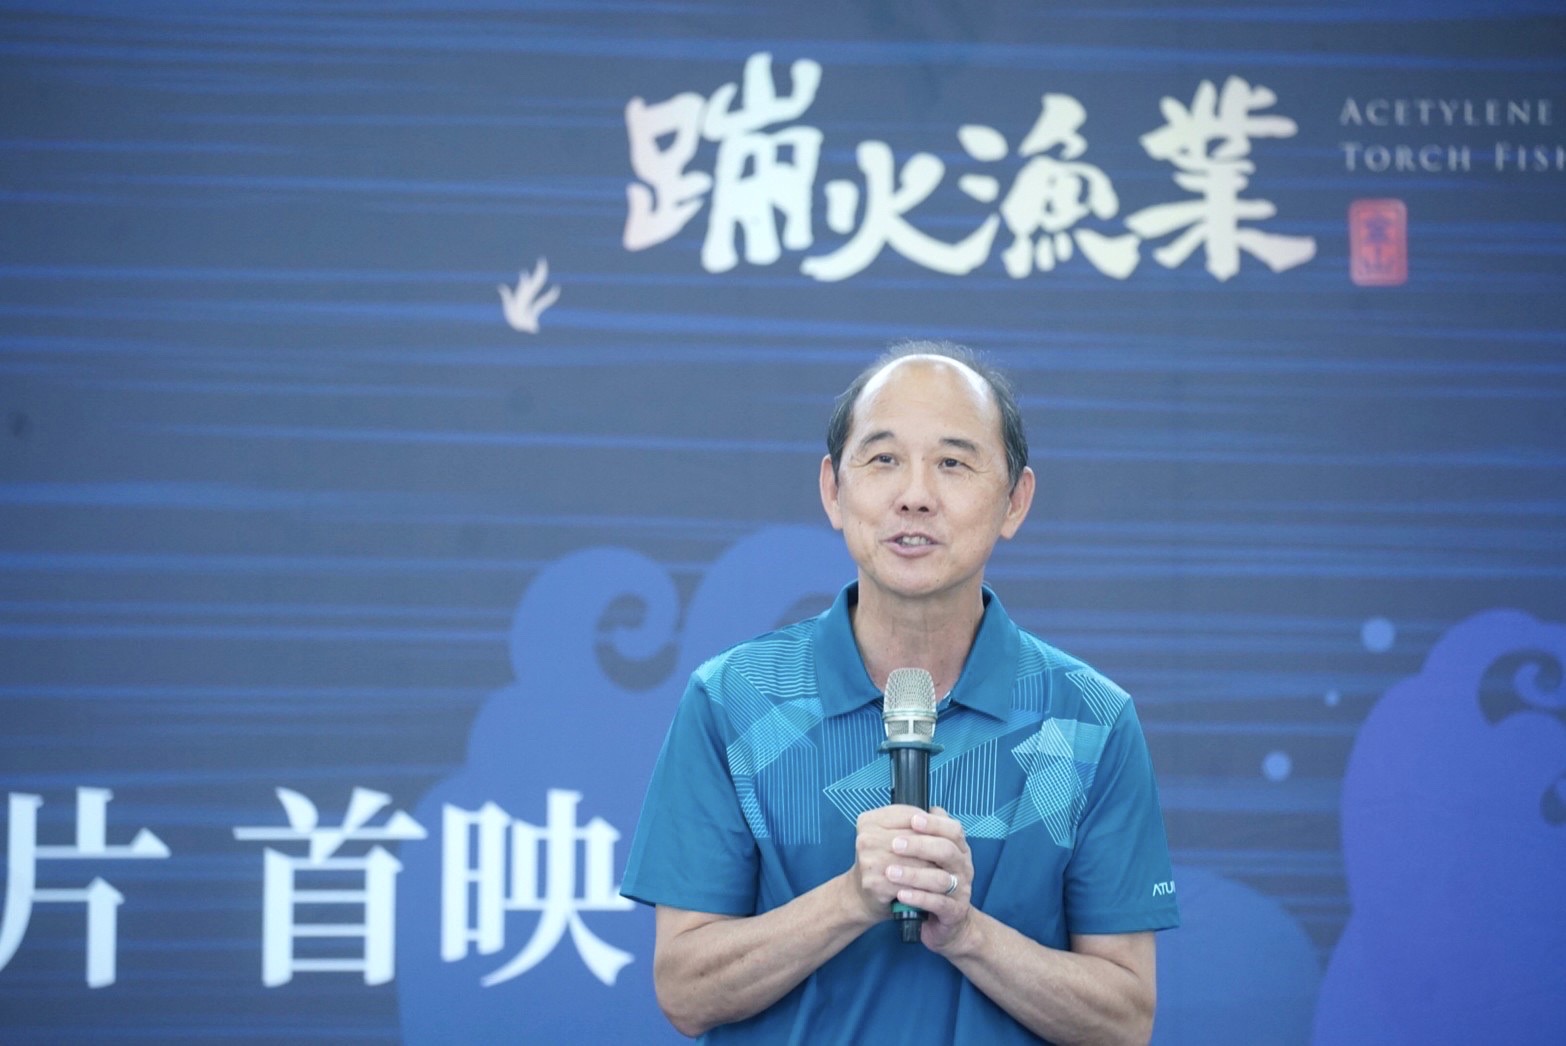 Speech by Fang Zhengguang, director of the Northguan National Scenic Area Administration